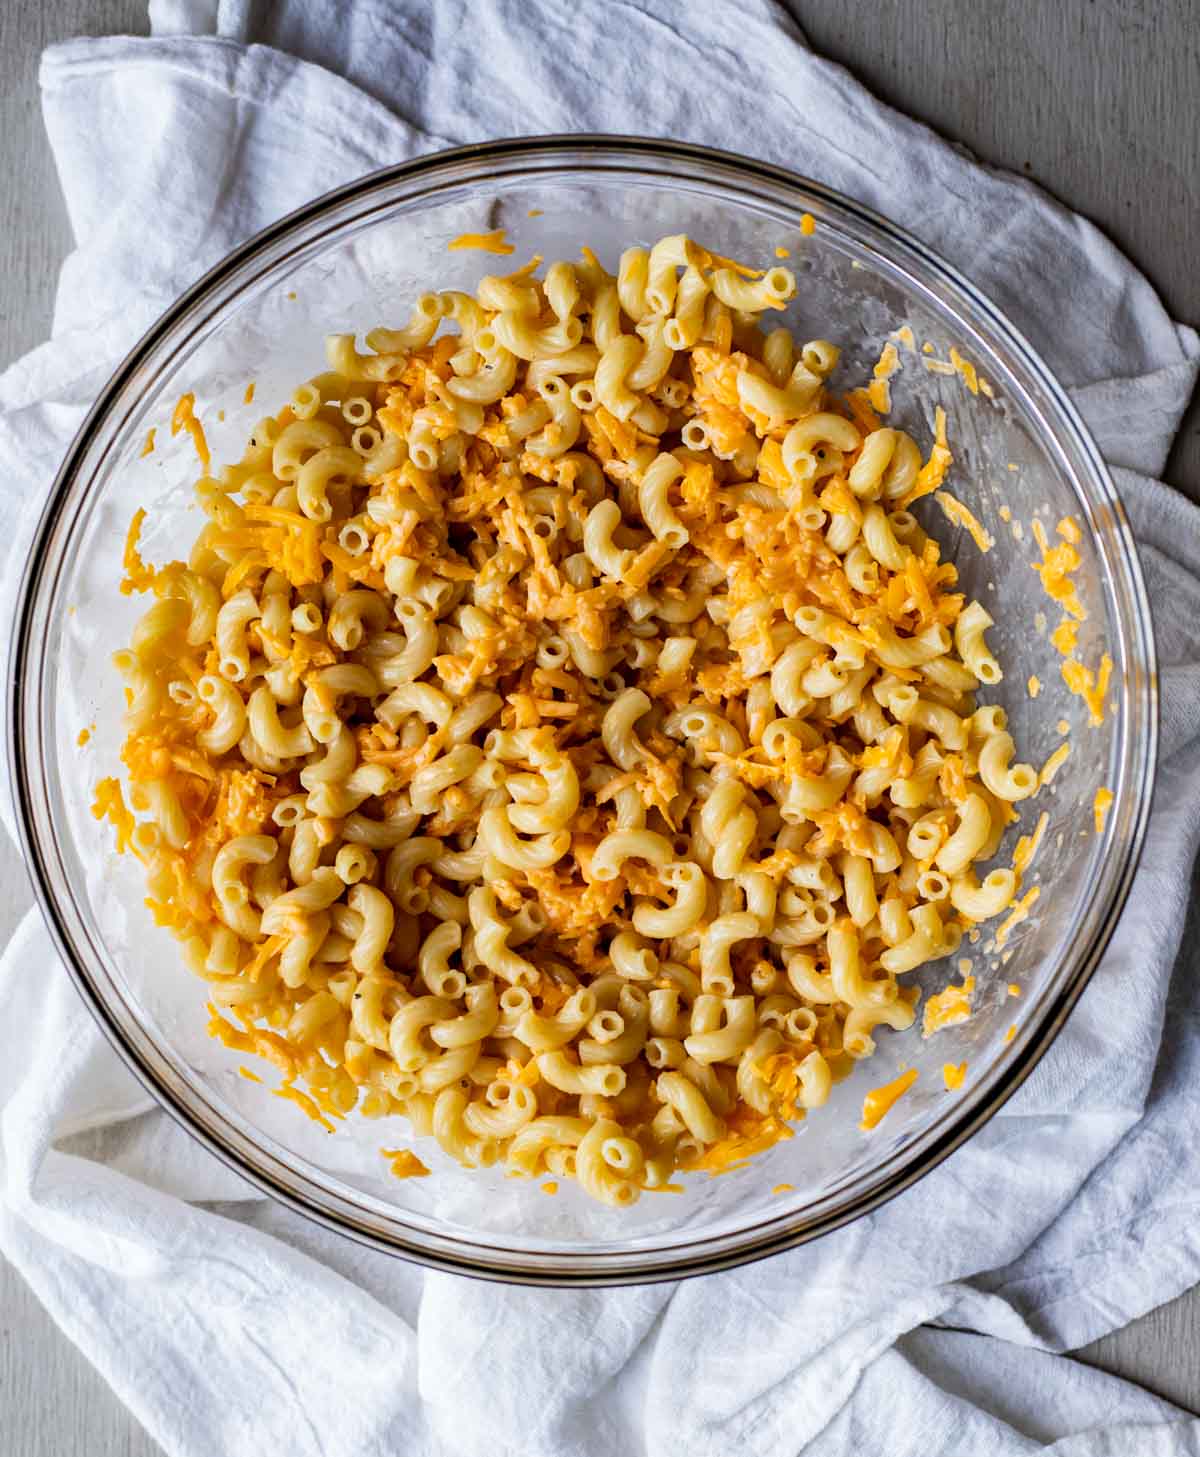 Mac and cheese ingredients mixed together in a large glass bowl.